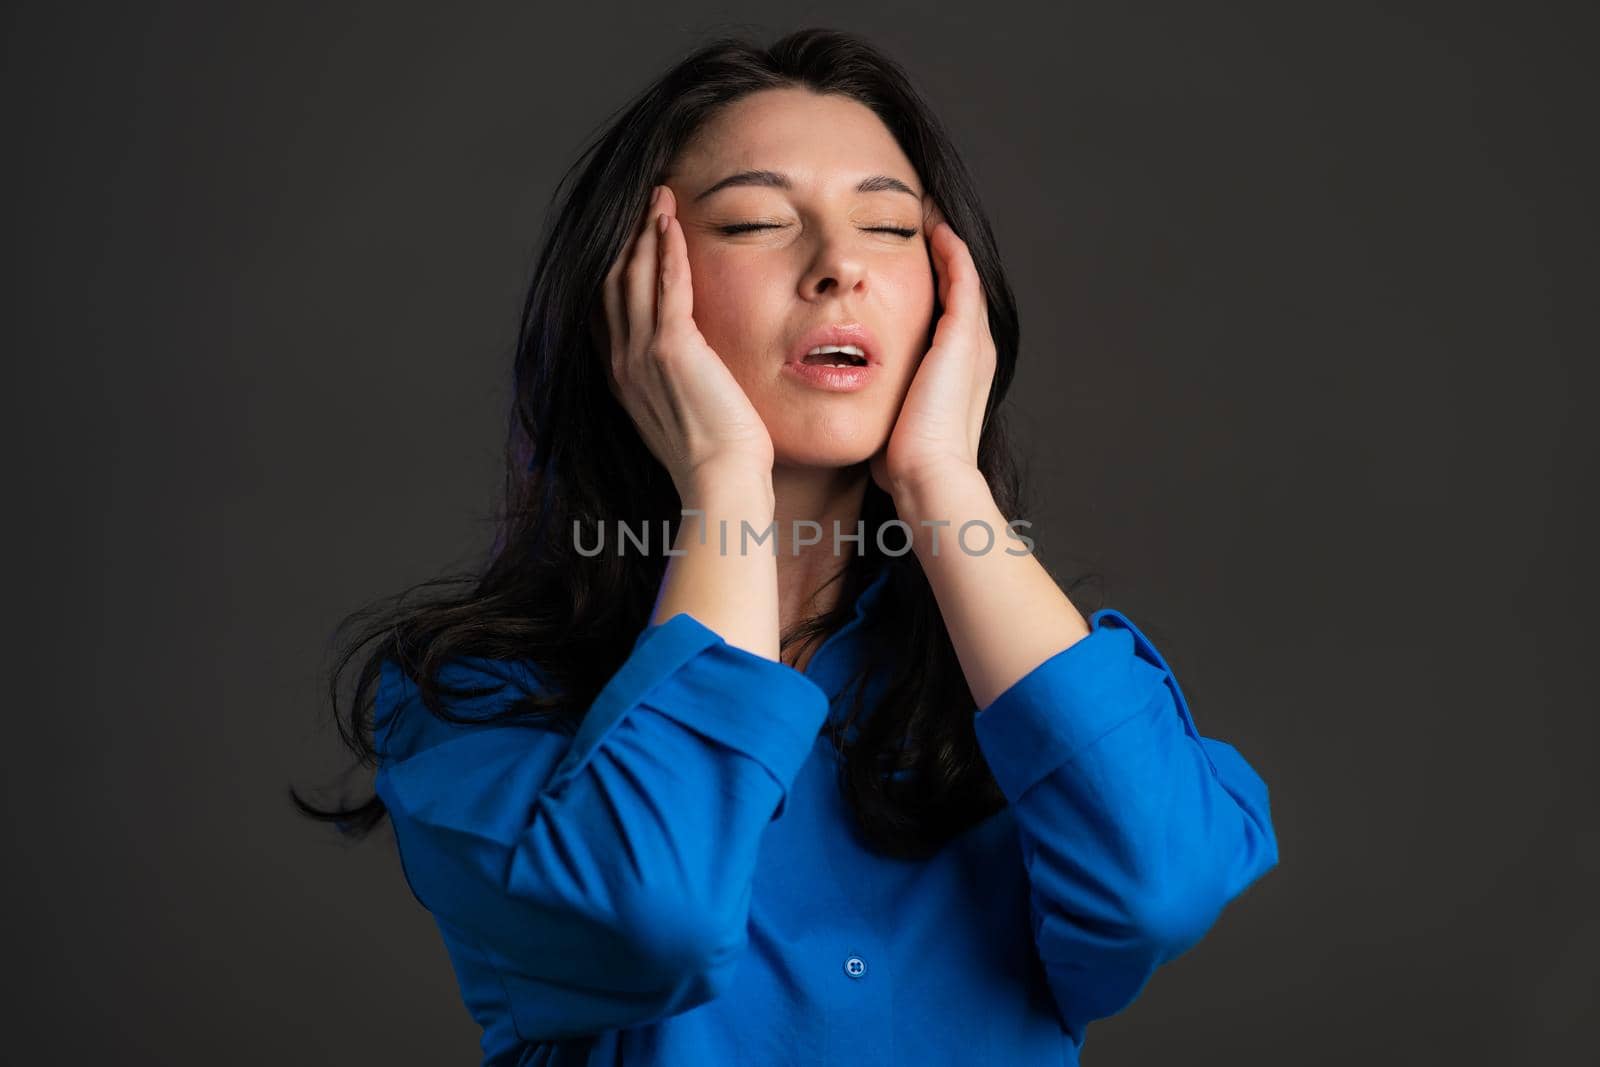 Bored mature woman with long hair having headache, studio portrait. Girl putting hands on head, isolated on grey background. Concept of problems and headache